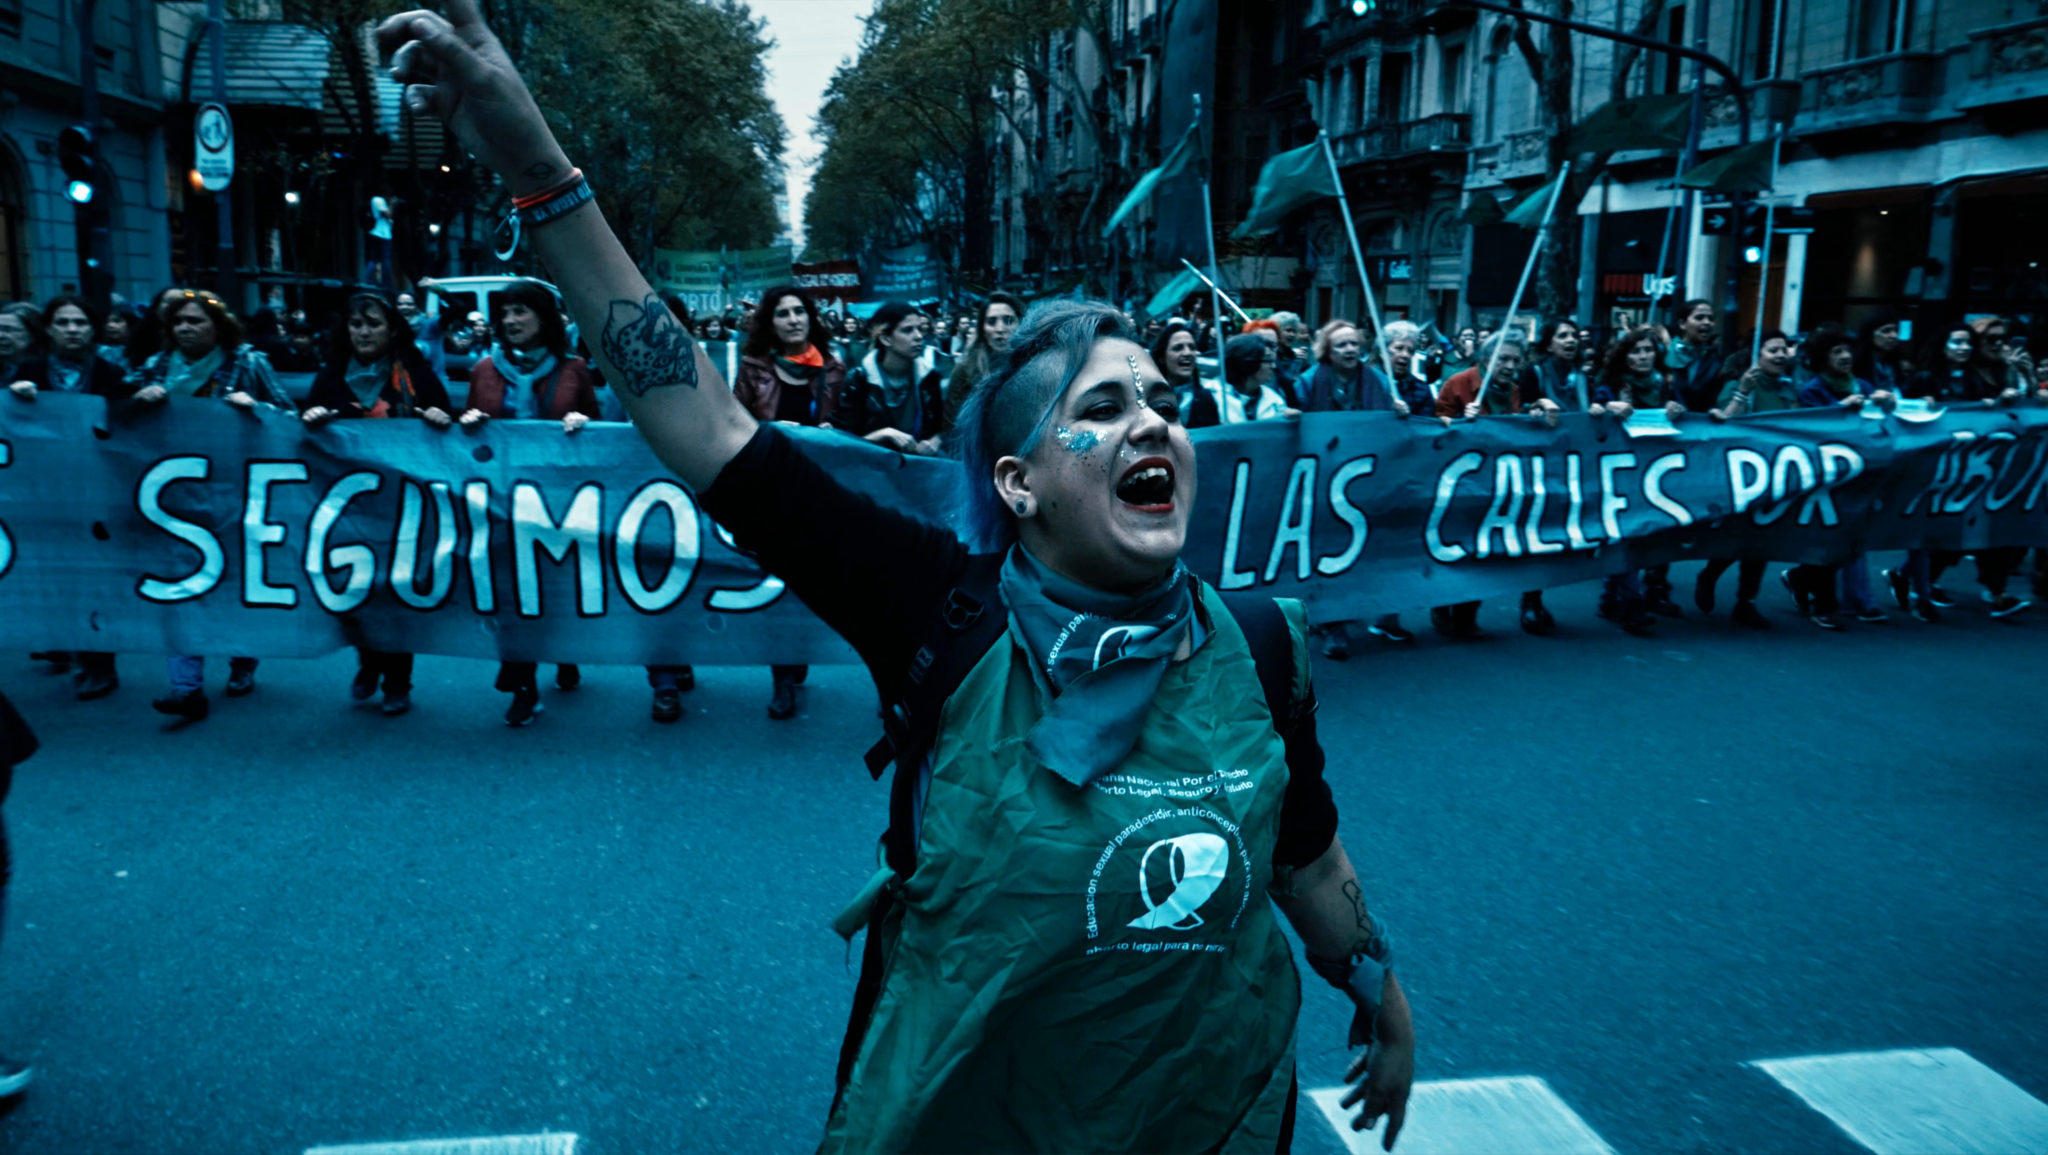 Q&A with “Que Sea Ley” director about Argentina’s fight for legal abortion